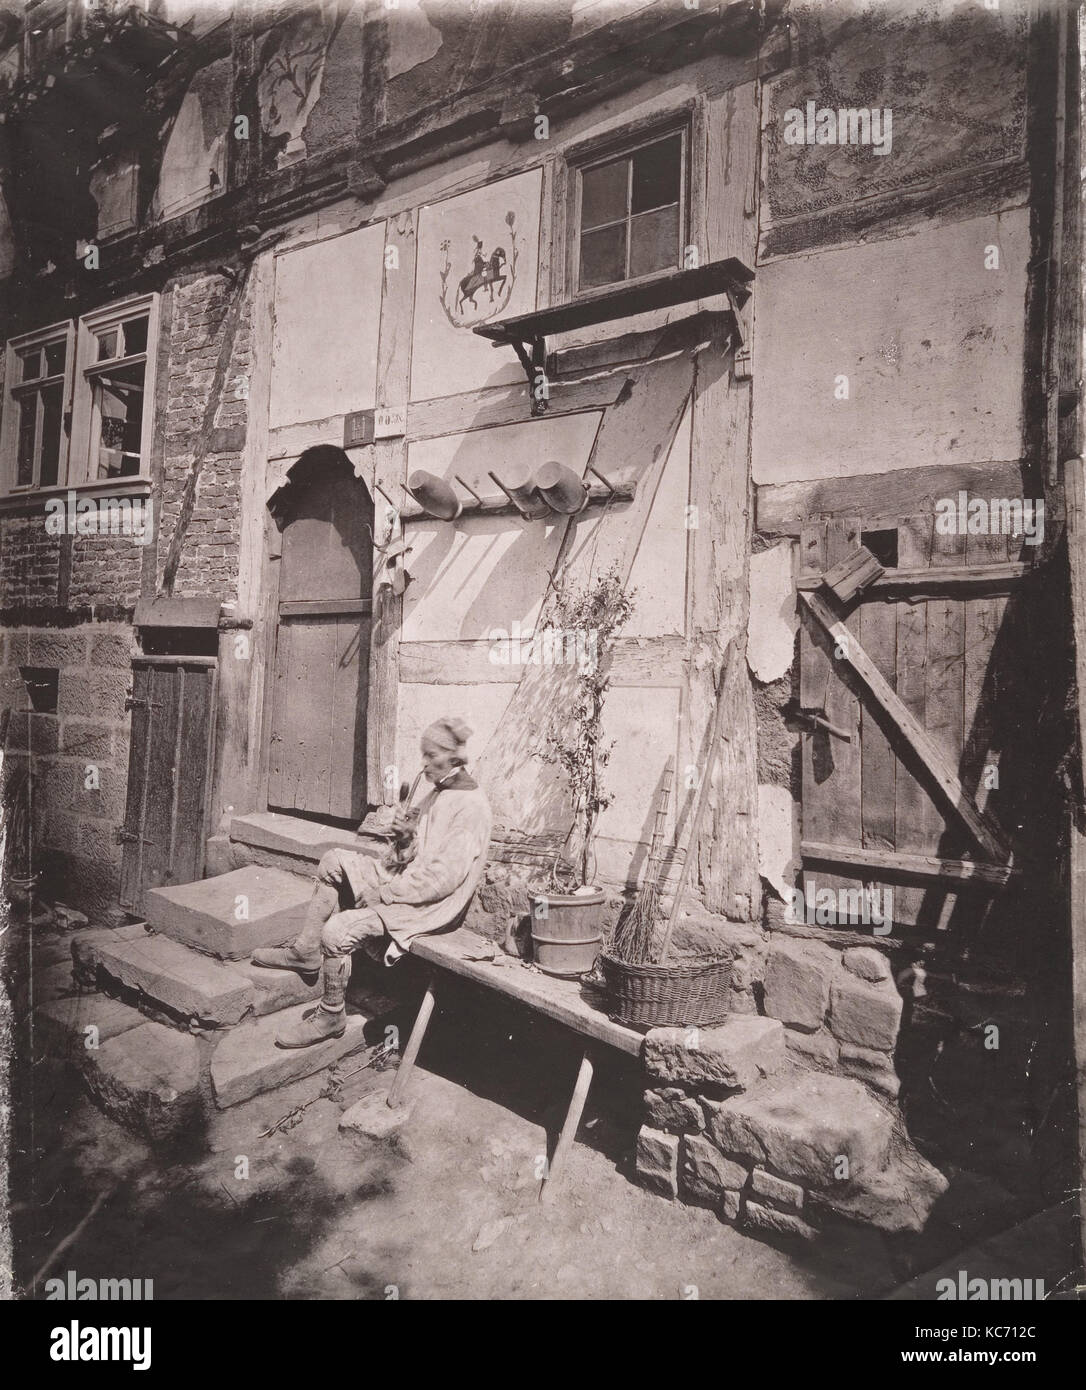 Man Smoking Pipe Outside His Home on Village Street, Unknown, 1880s Stock Photo